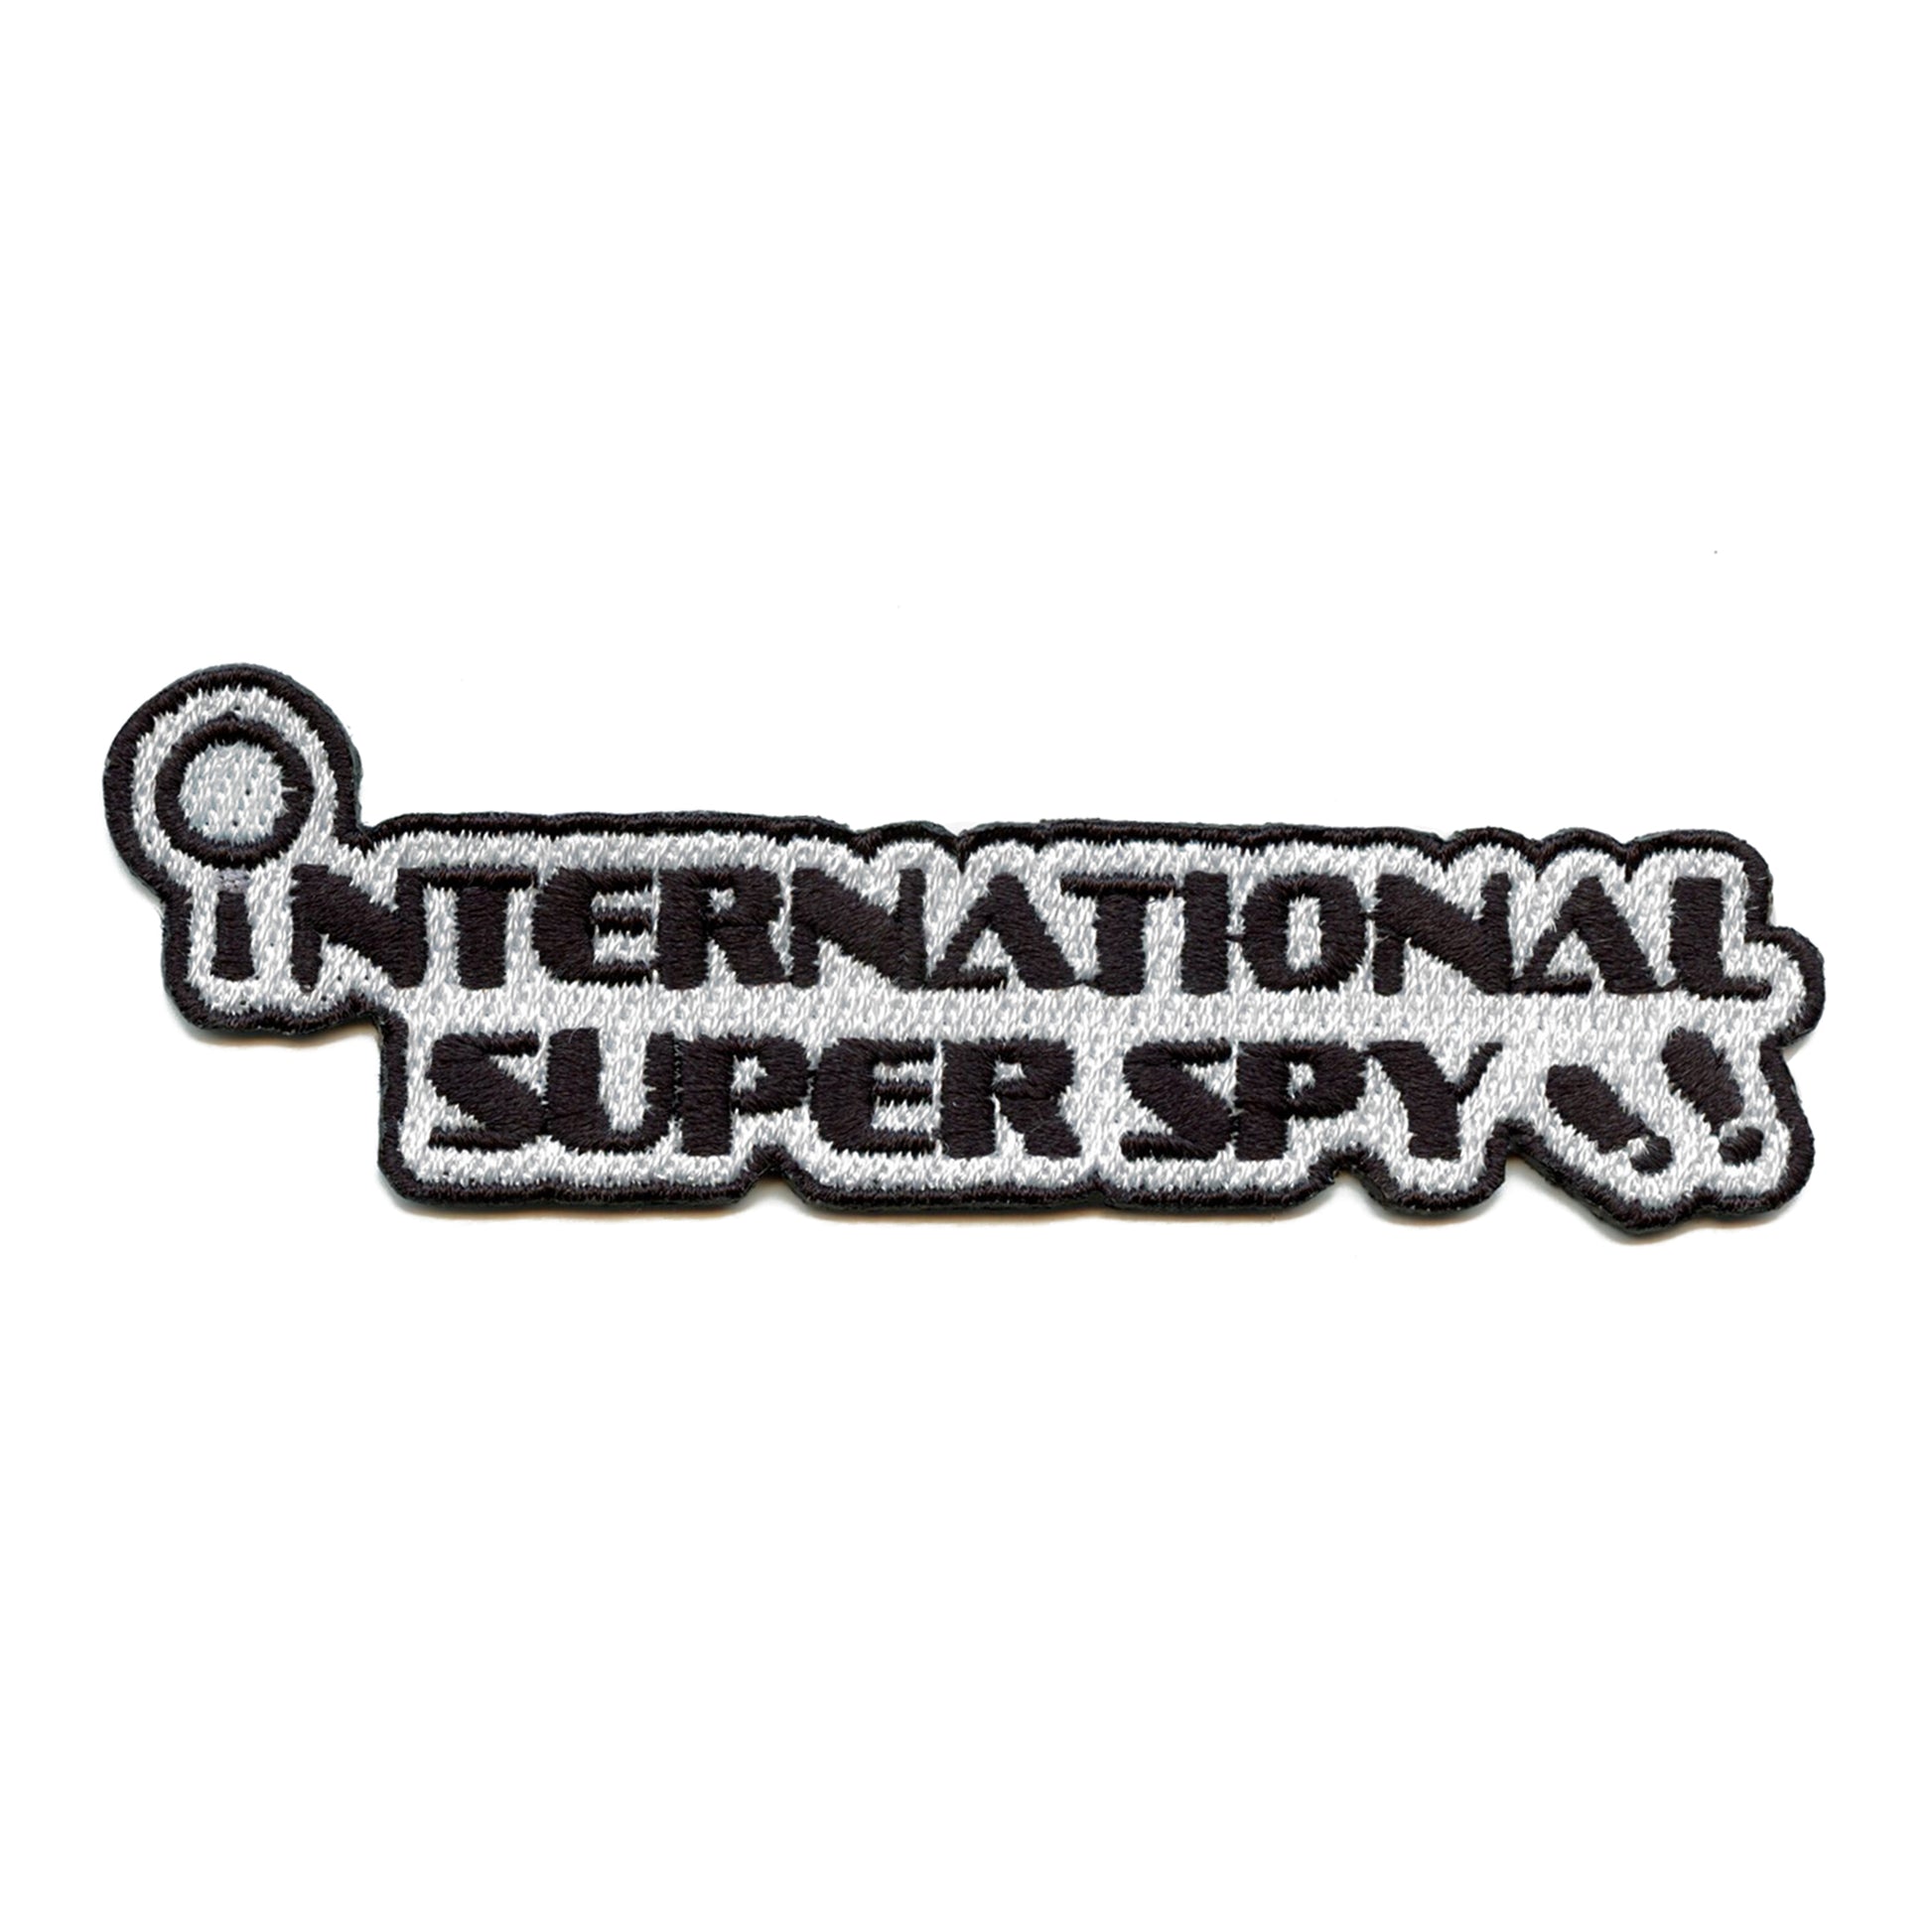 International Super Spy Patch Cartoon Song Embroidered Iron On 